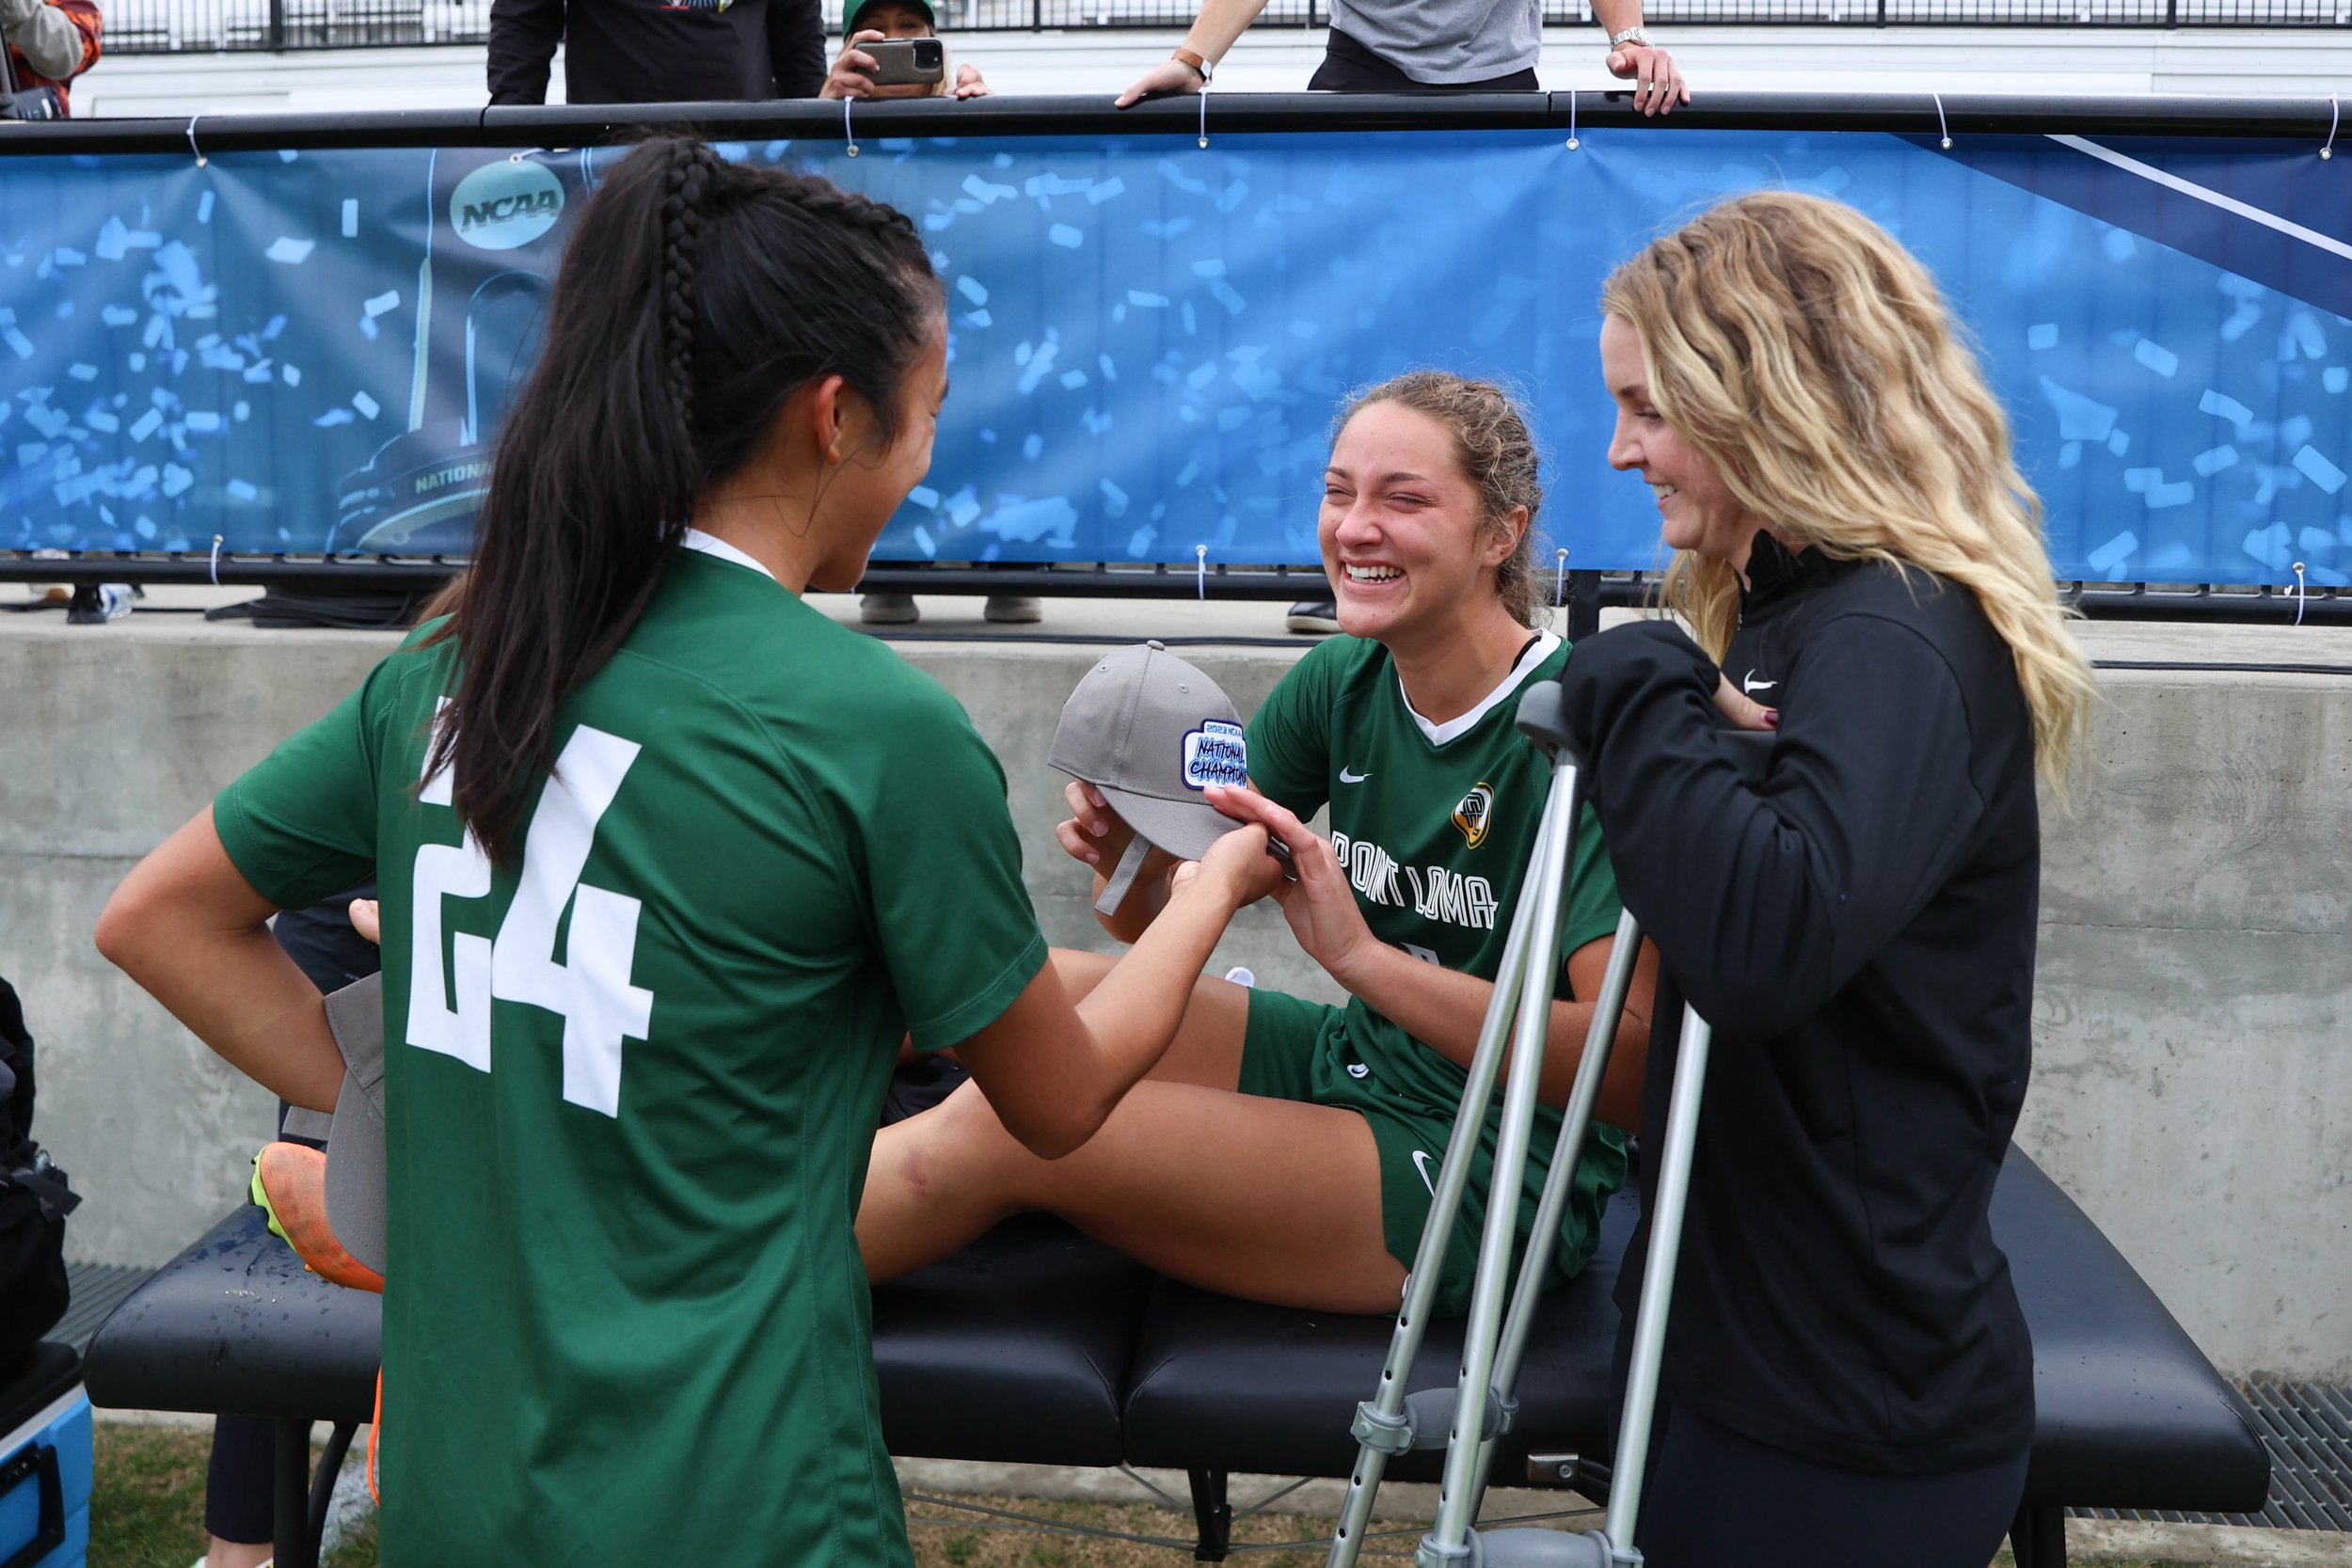  MATTHEWS, NORTH CAROLINA - DECEMBER 9: Bethany Arabe #24 gives Jensen Shrout #5 of the Point Loma Sea Lions a championship hat as they celebrate defeating the Washburn Ichabods during the Division II Women's Soccer Championship held at Sportsplex Ma